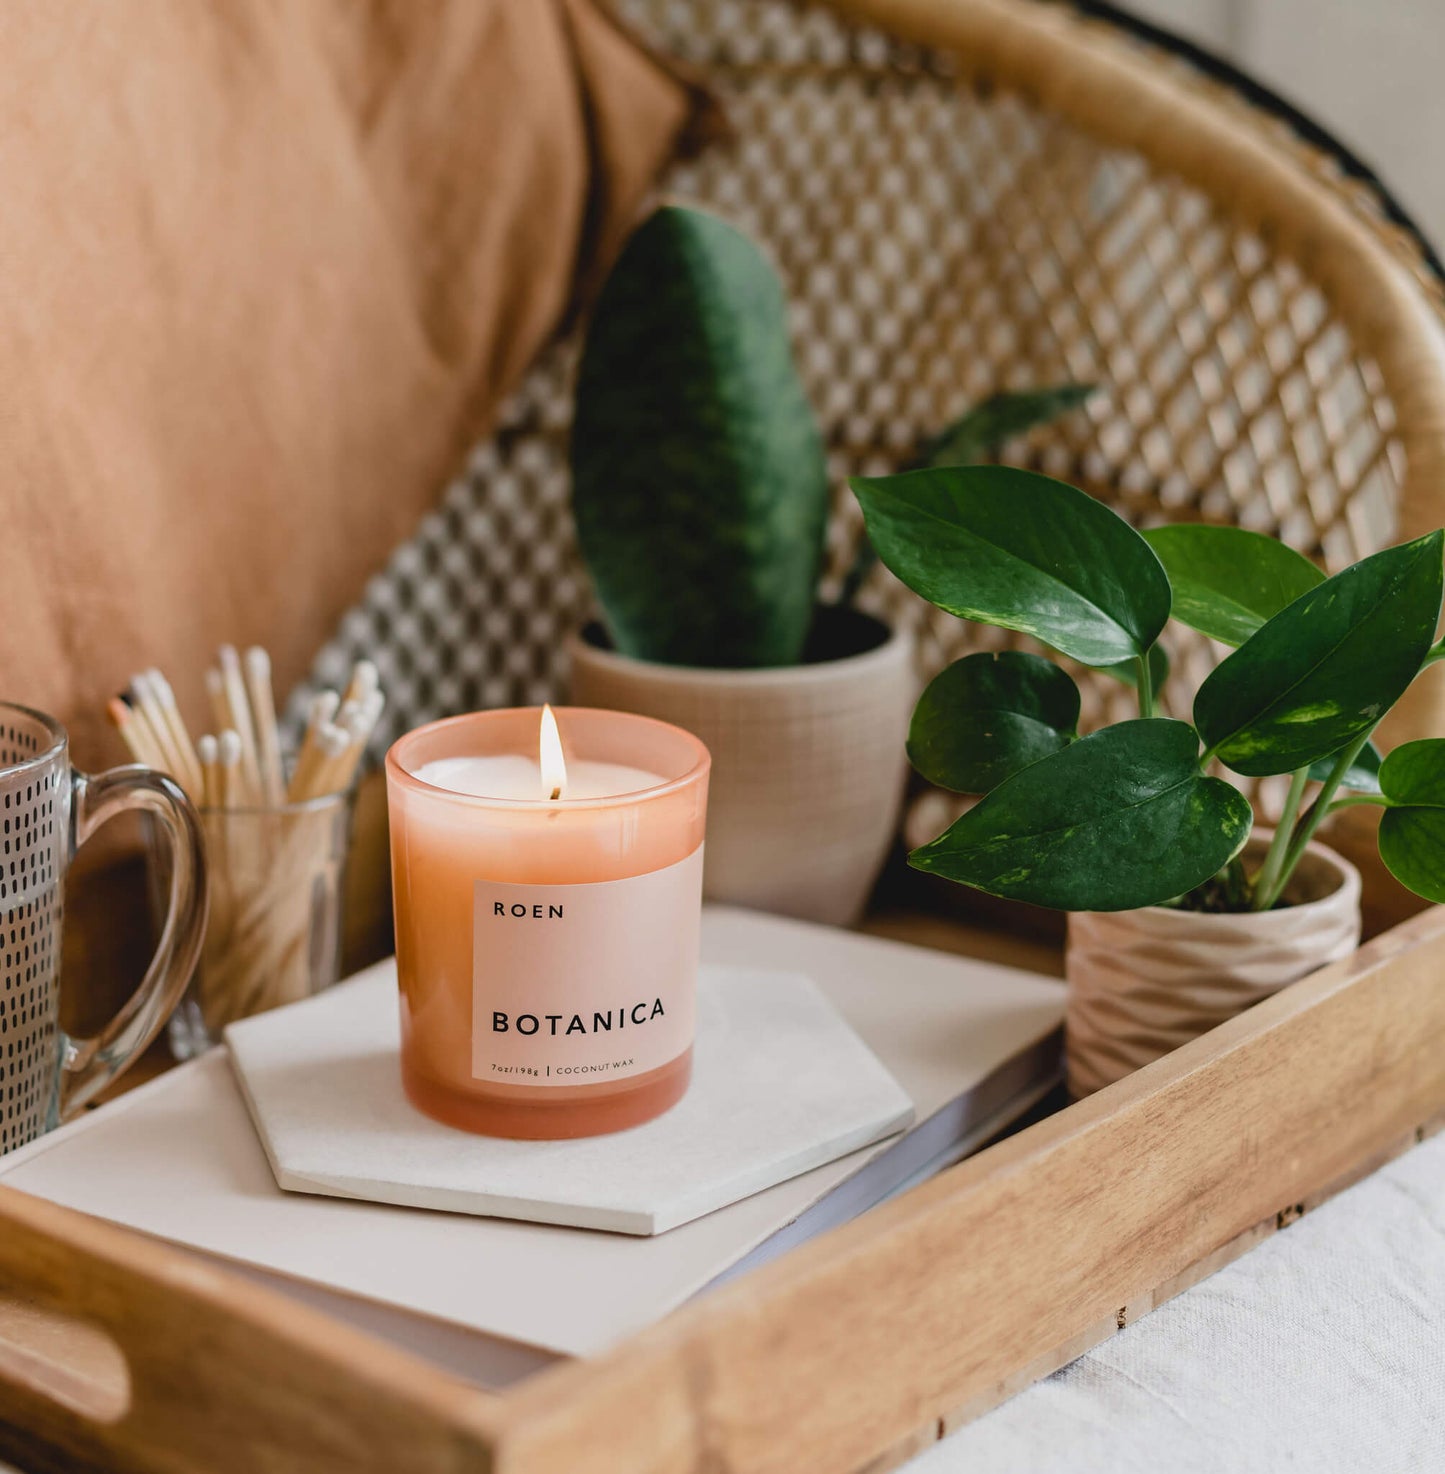 R O E N Botanica Scented Candle - Osmology Scented Candles & Home Fragrance